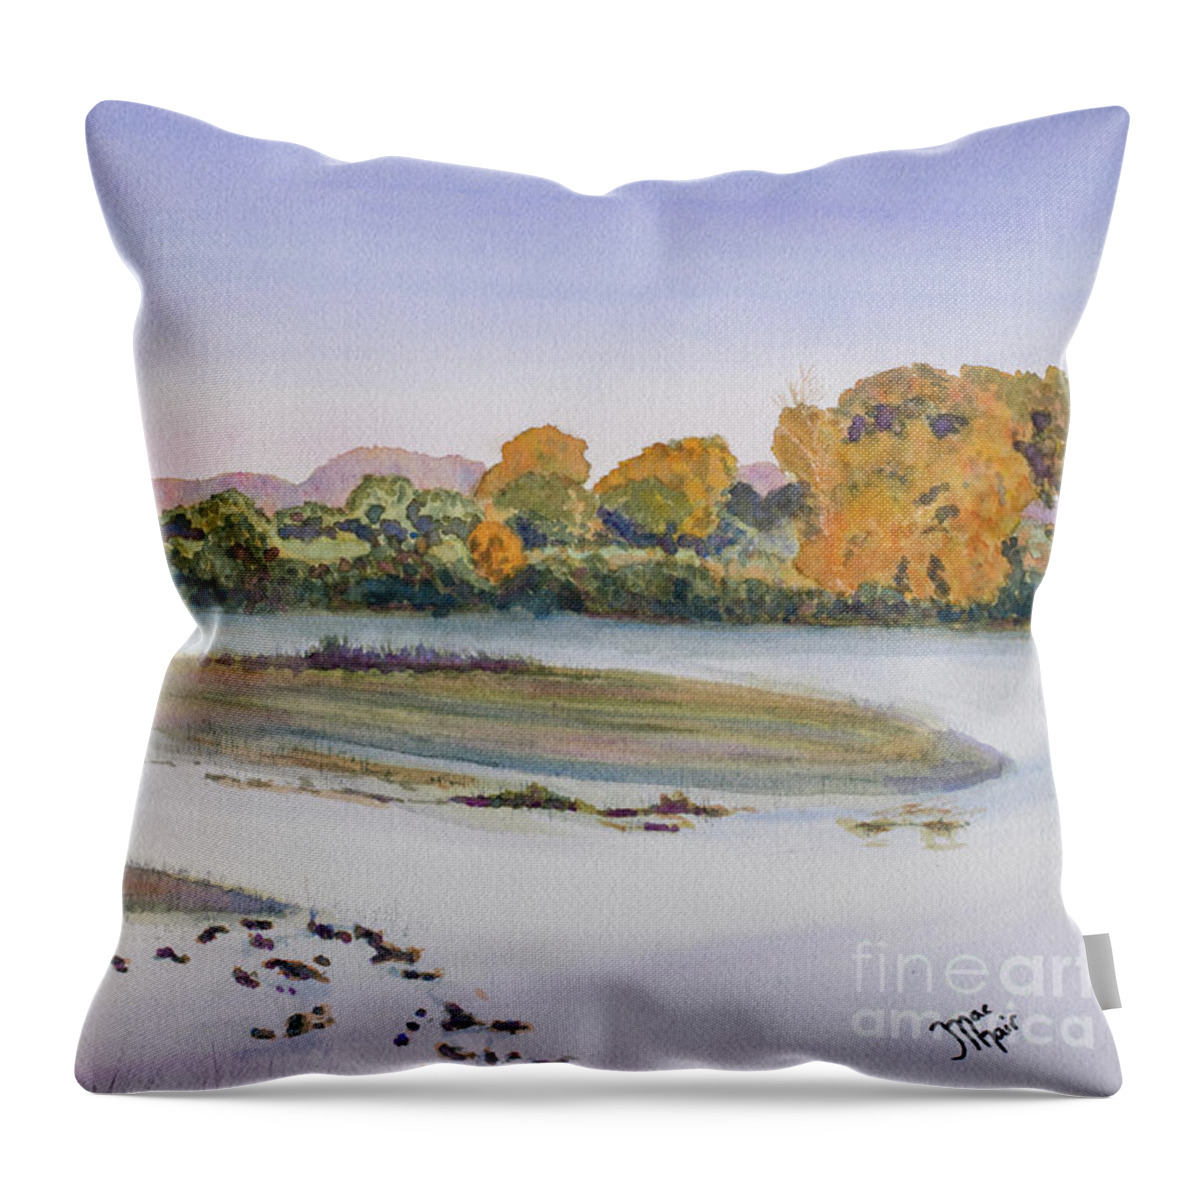 Watercolor Throw Pillow featuring the painting Green River Morning by Jackie MacNair